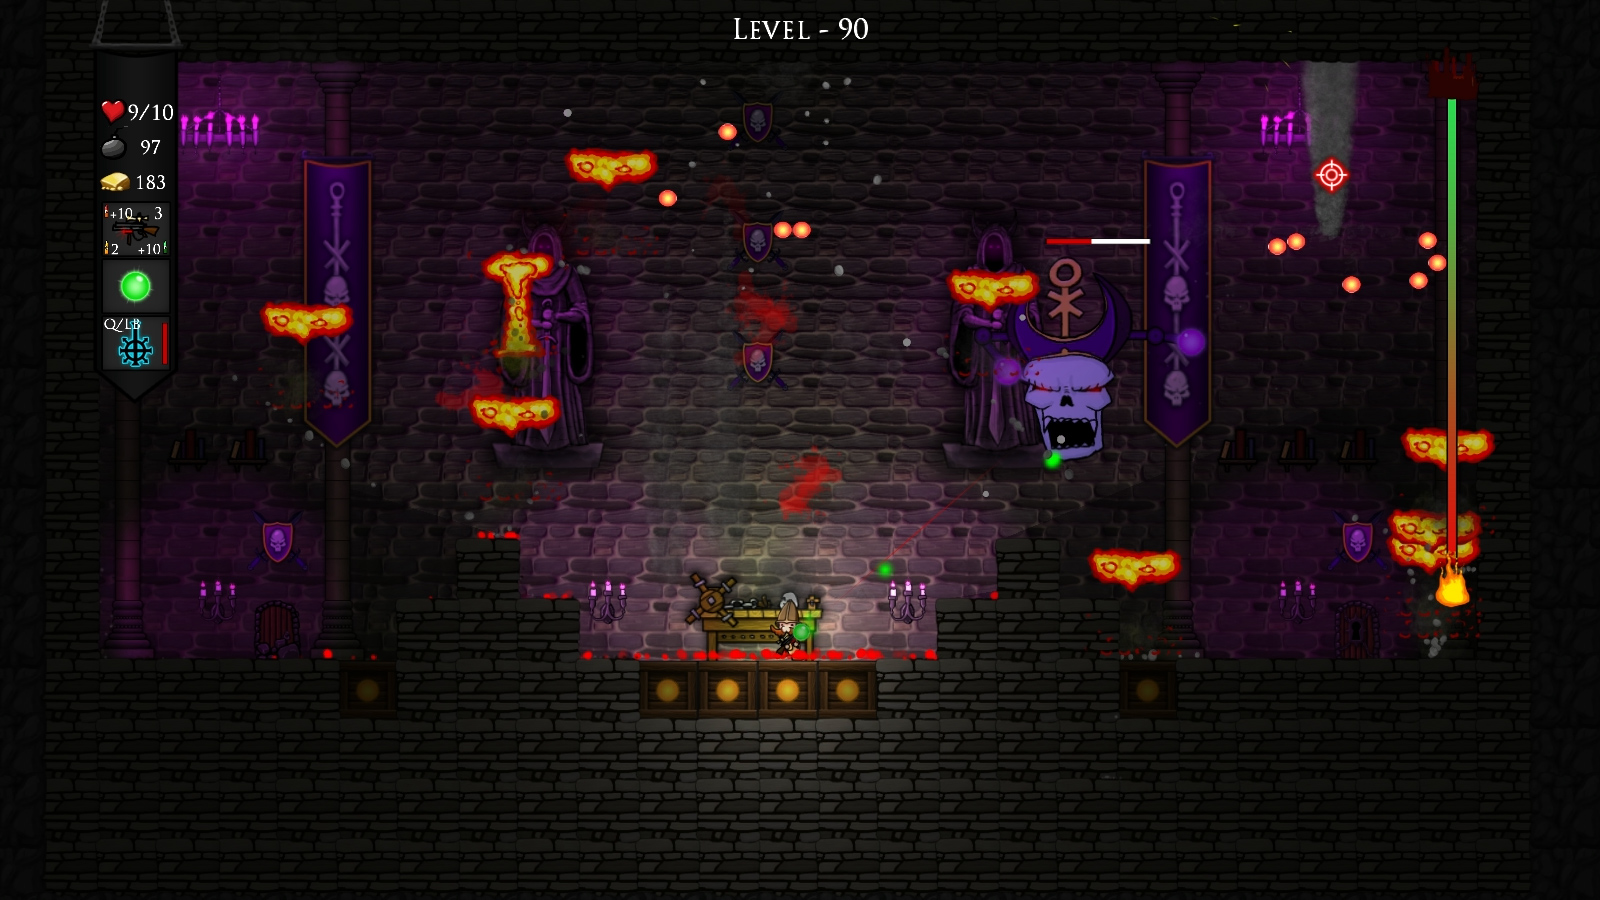 Злодейка 99 уровня 13. 99 Levels to Hell. To Hell and back игра. Level 99 games. Hyper Dust lvl 99.